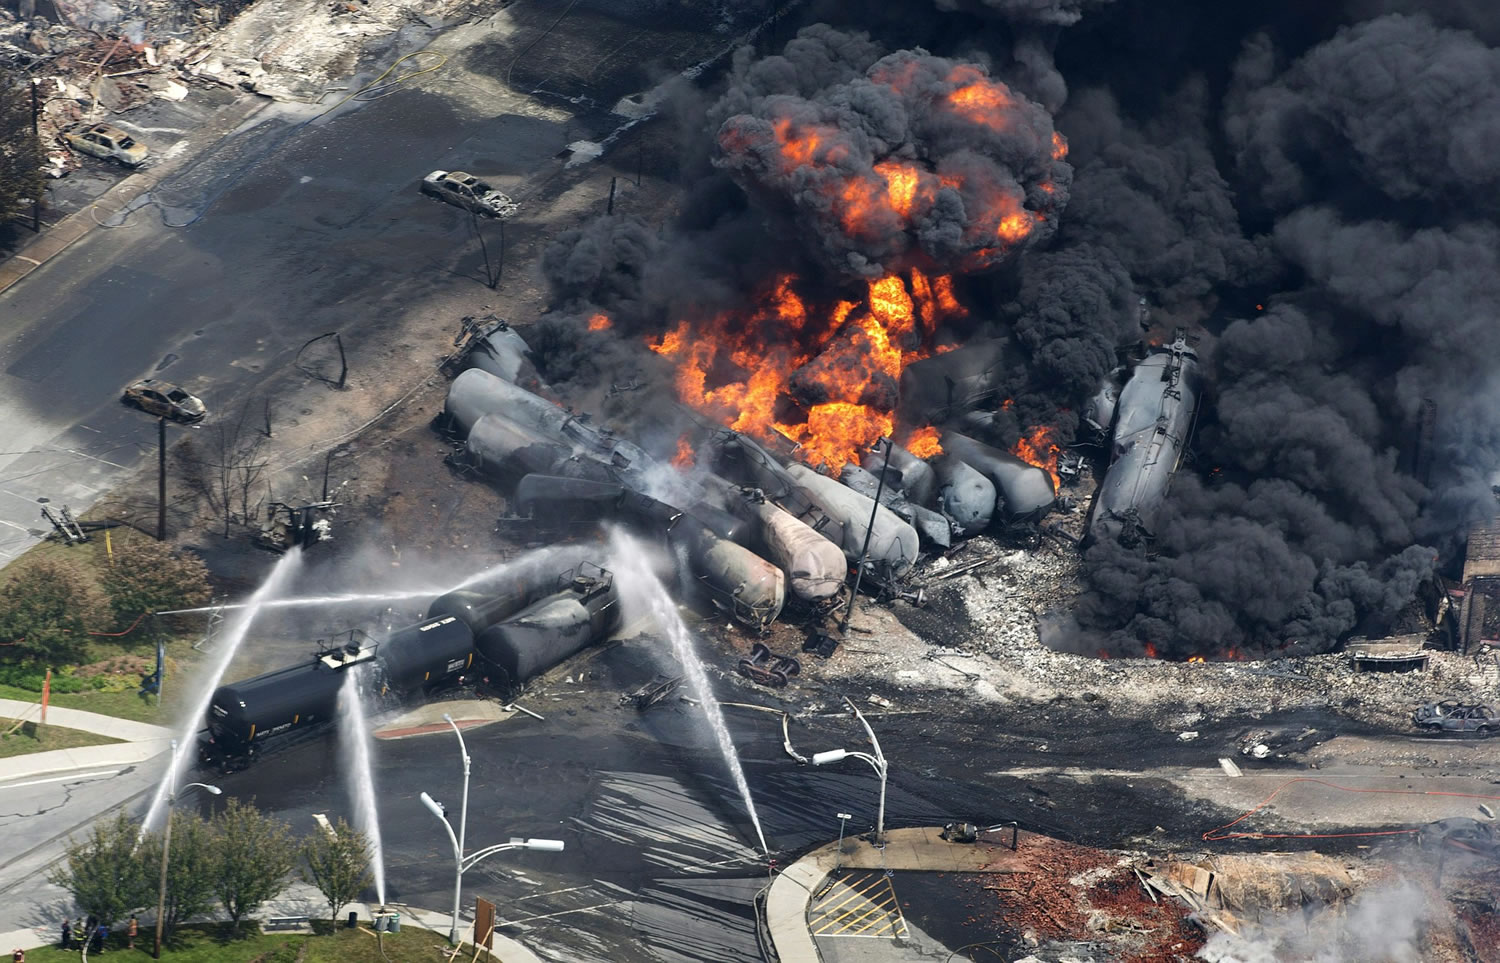 Canadian Press files
The oil train derailment disaster in downtown Lac-Megantic, Quebec, on July 6, 2013, increased awareness and safety concerns about the proposed oil terminal in Vancouver.